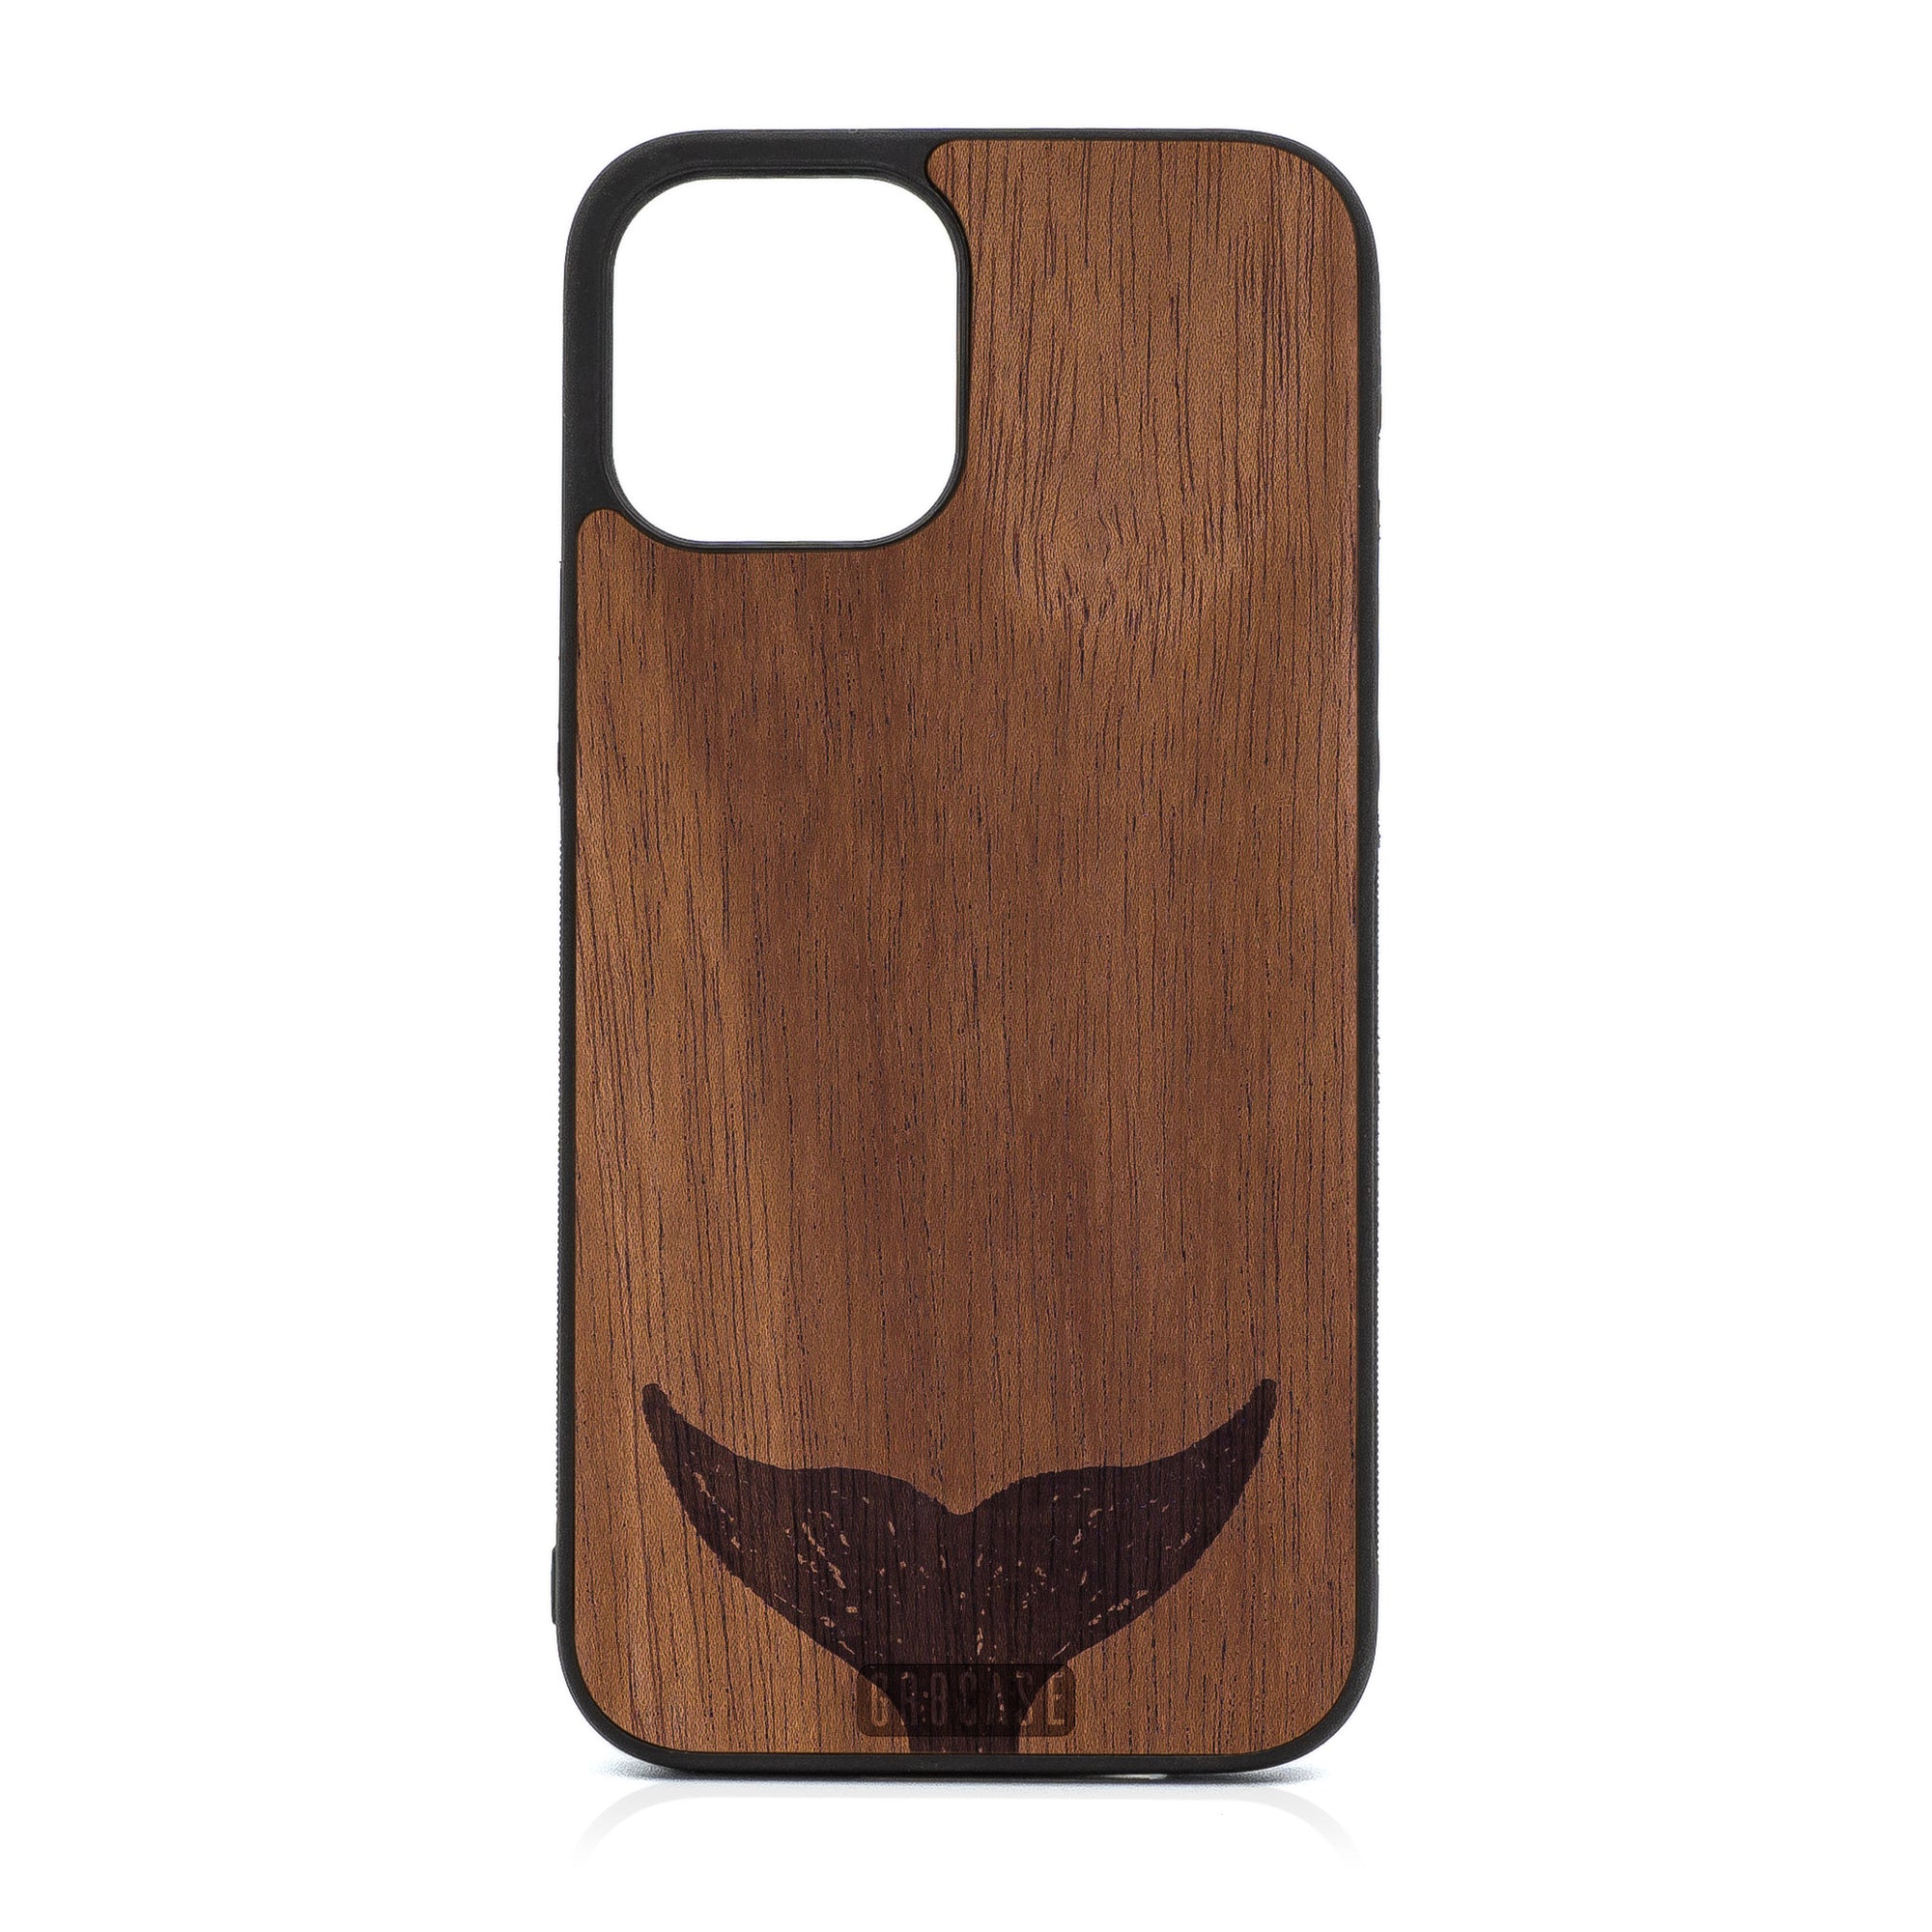 Whale Tail Design Wood Case For iPhone 12 Pro Max